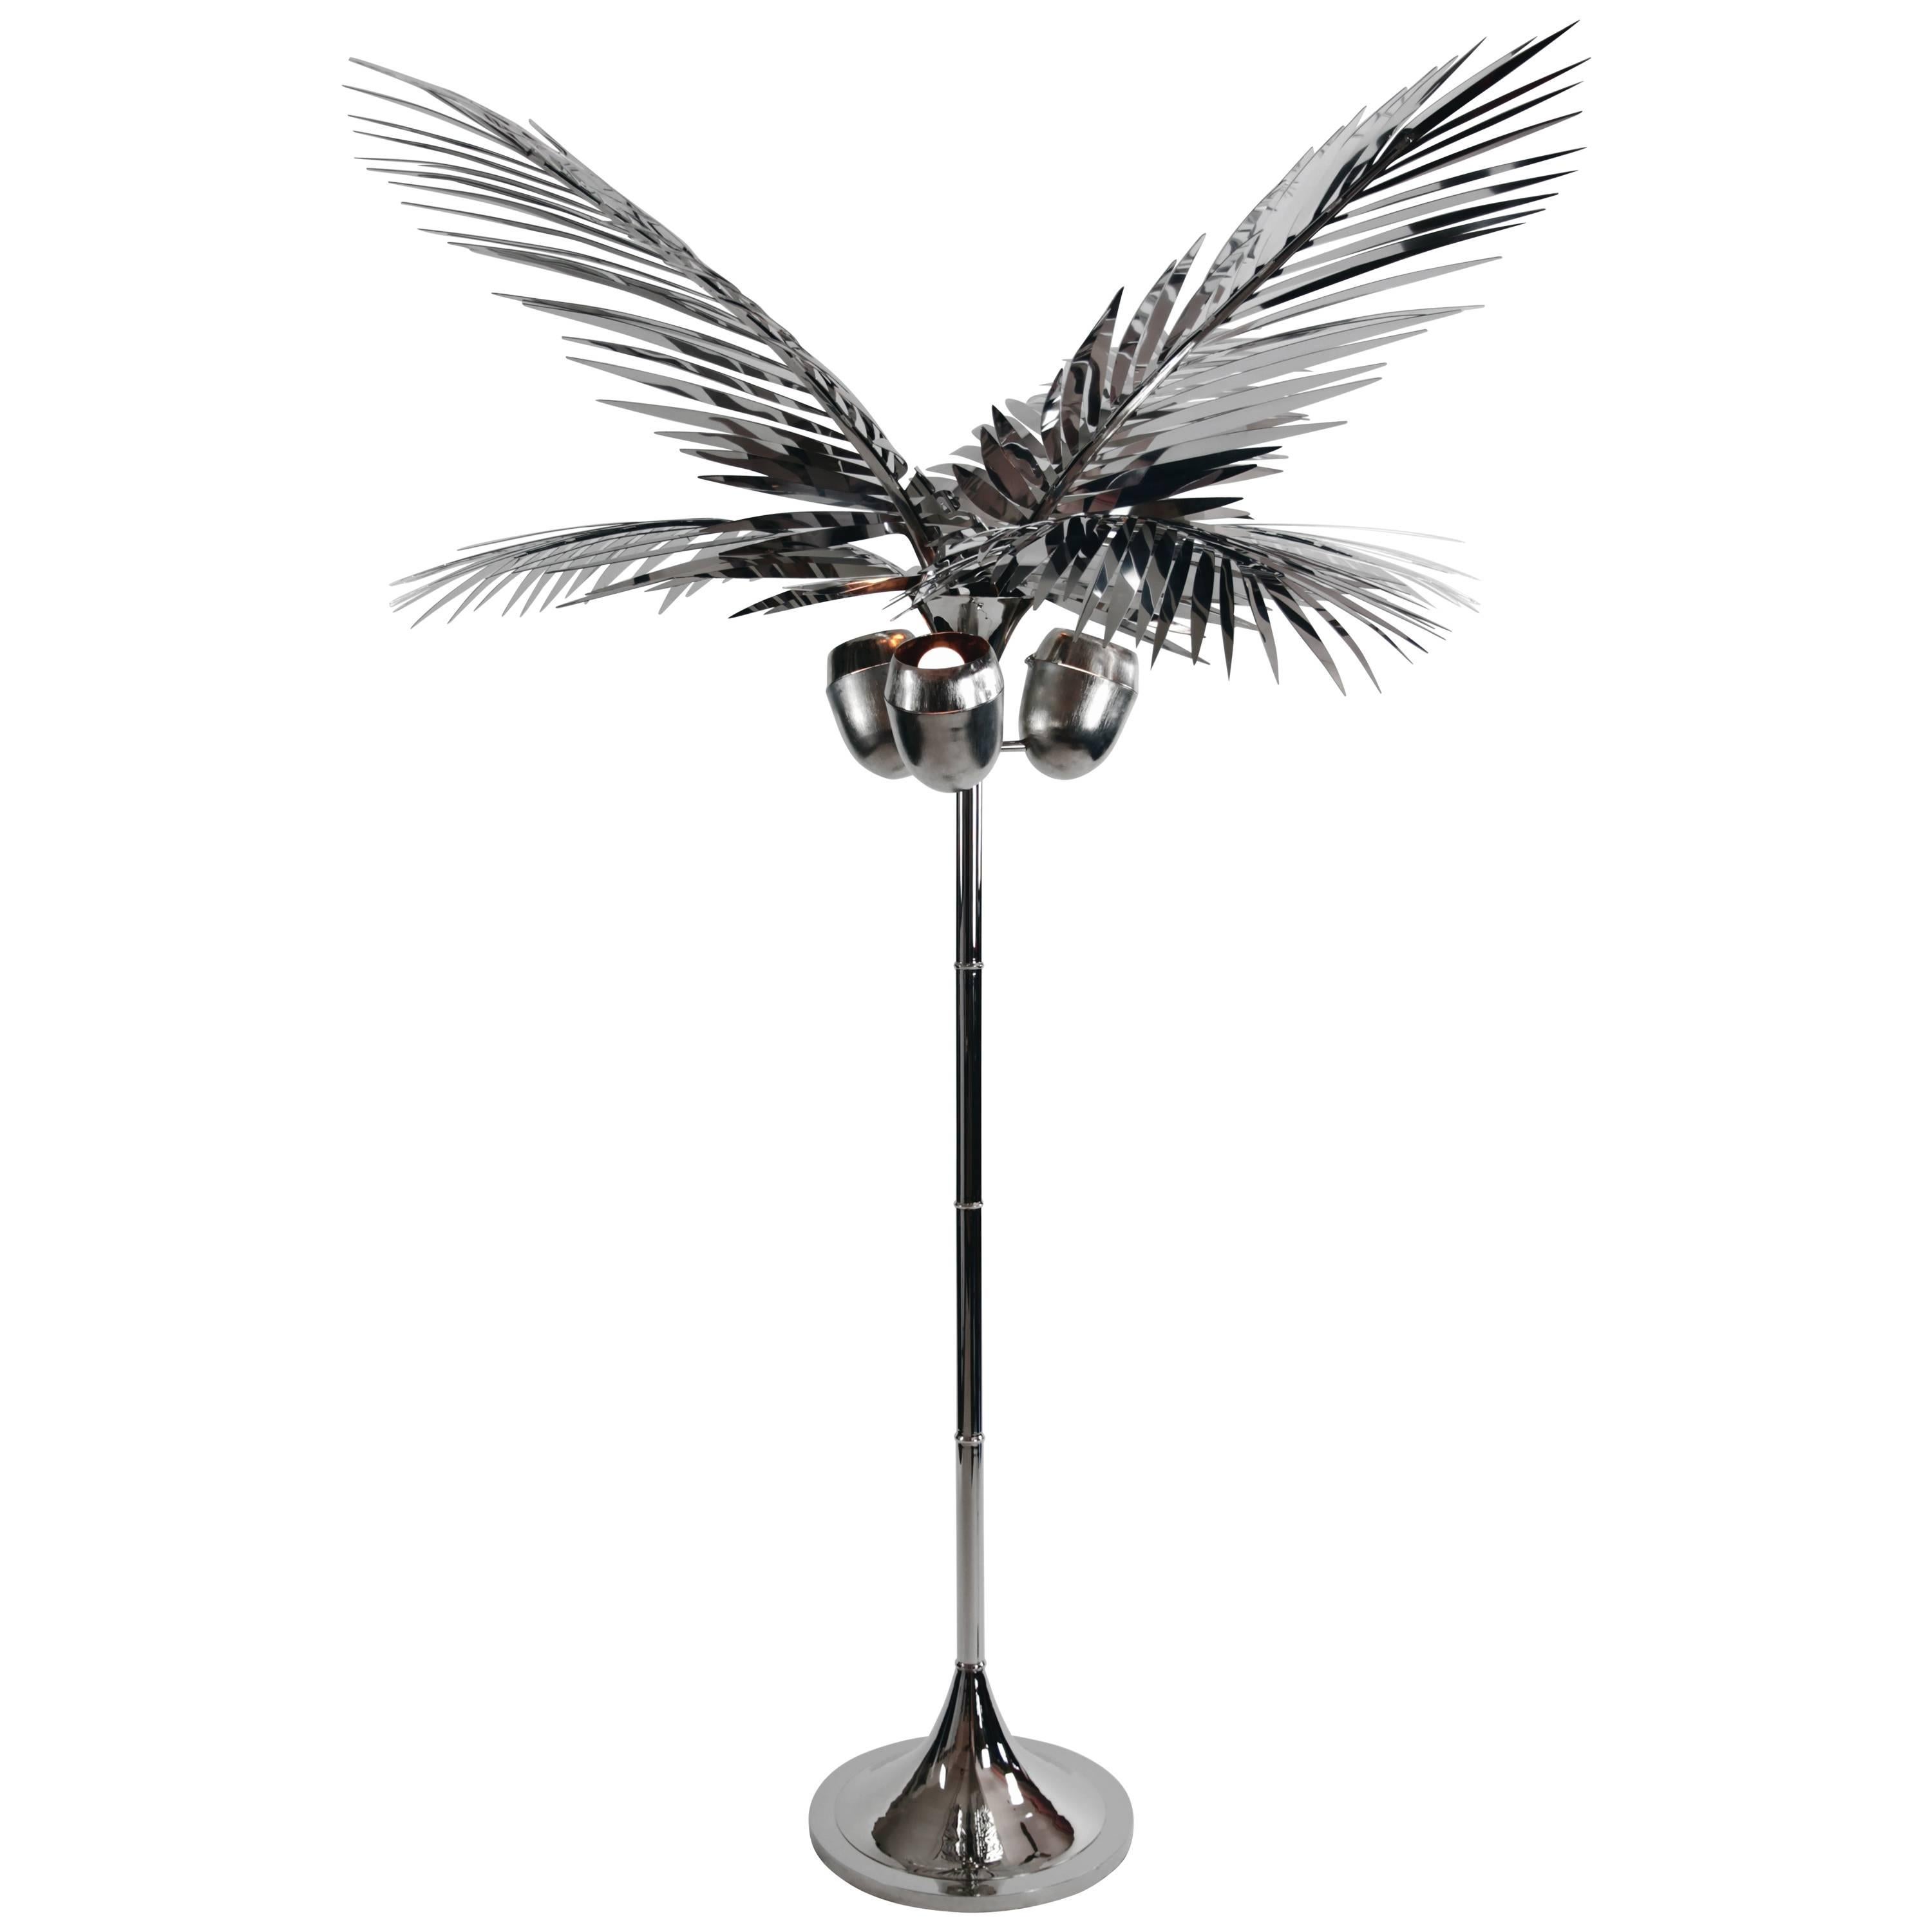 California King Palm Tree Floor Lamp Nickel Plated Brass by Christopher Kreiling For Sale